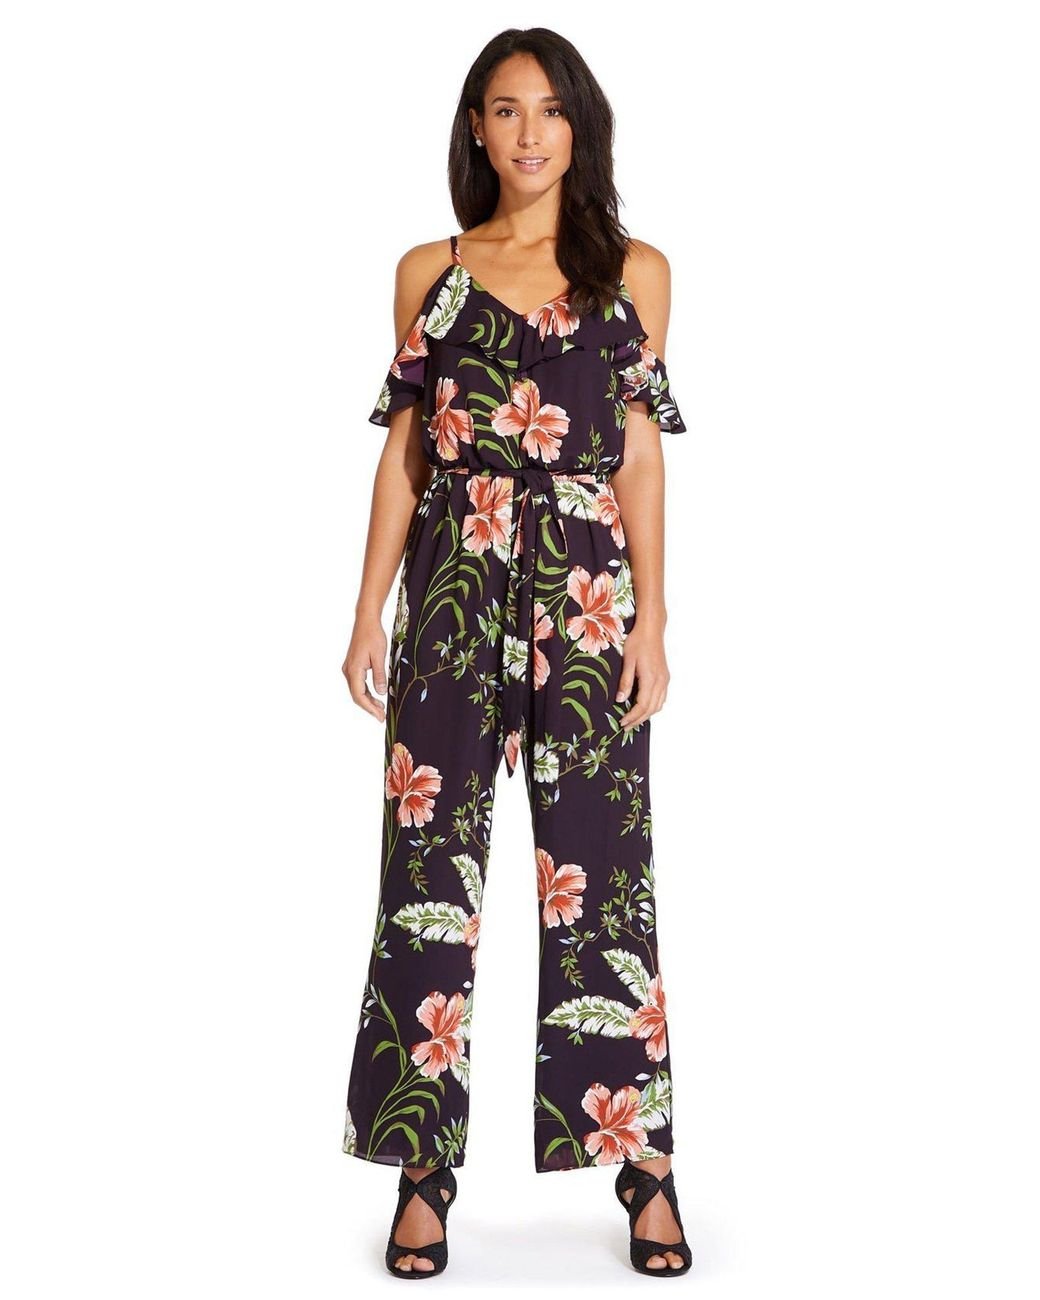 Adrianna Papell Cold Shoulder Floral Printed Jumpsuit in Black - Lyst